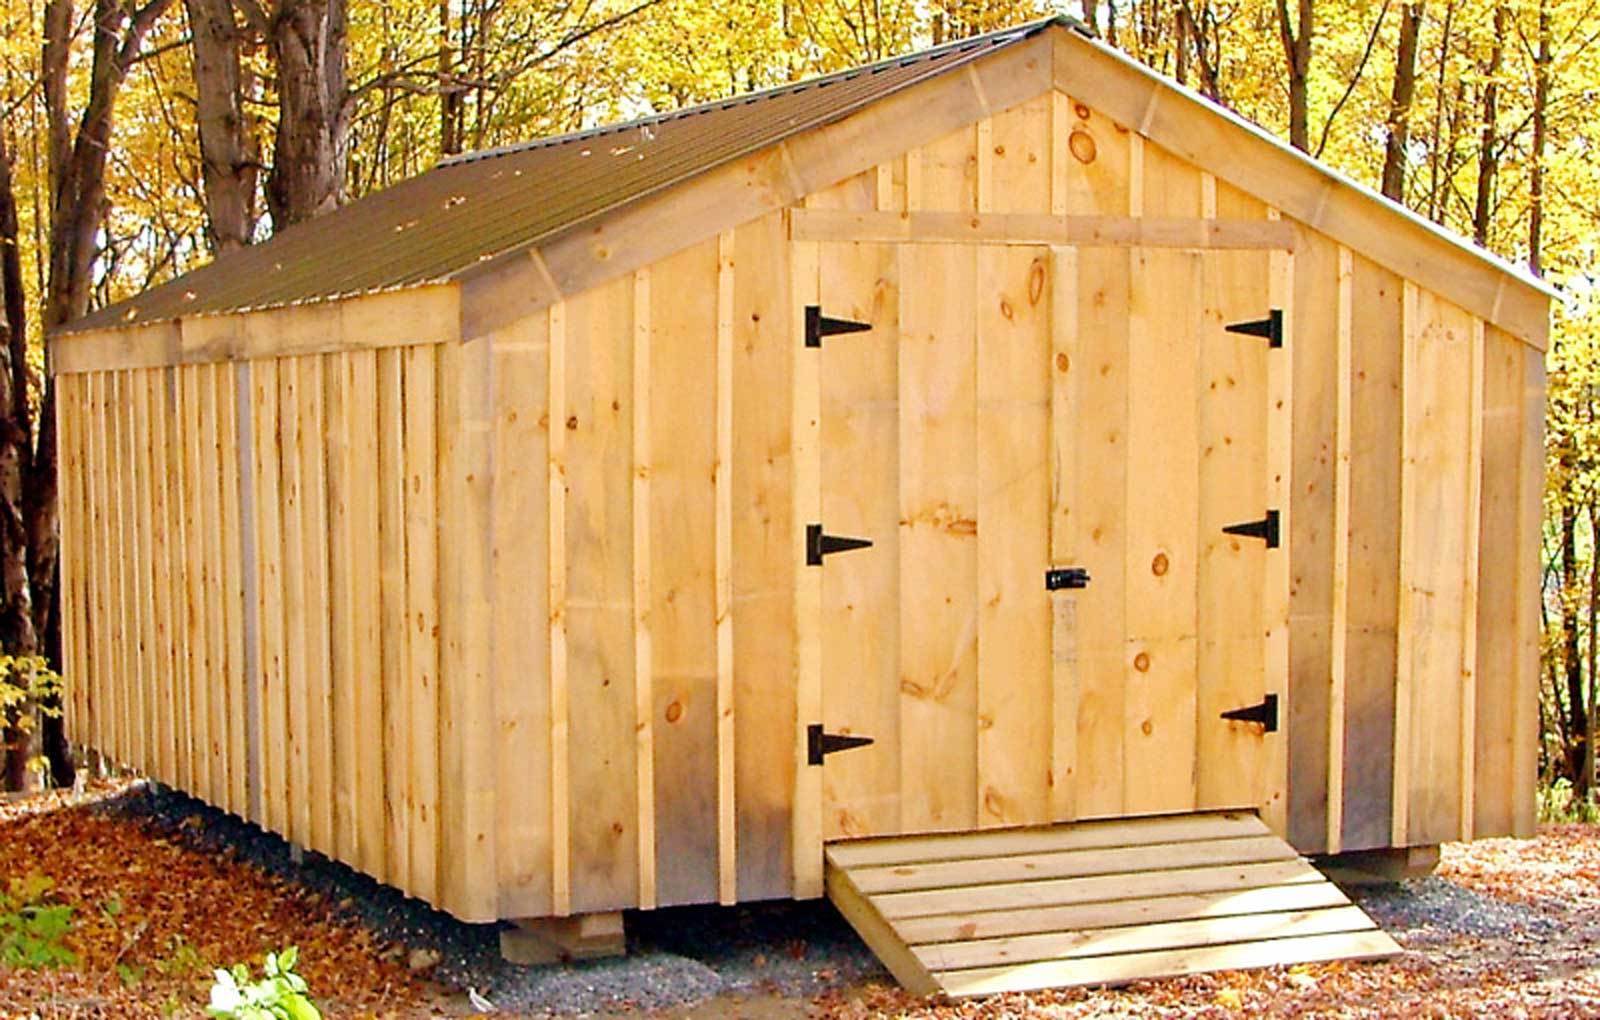 14 x 20 barn shed plans diy do it yourself